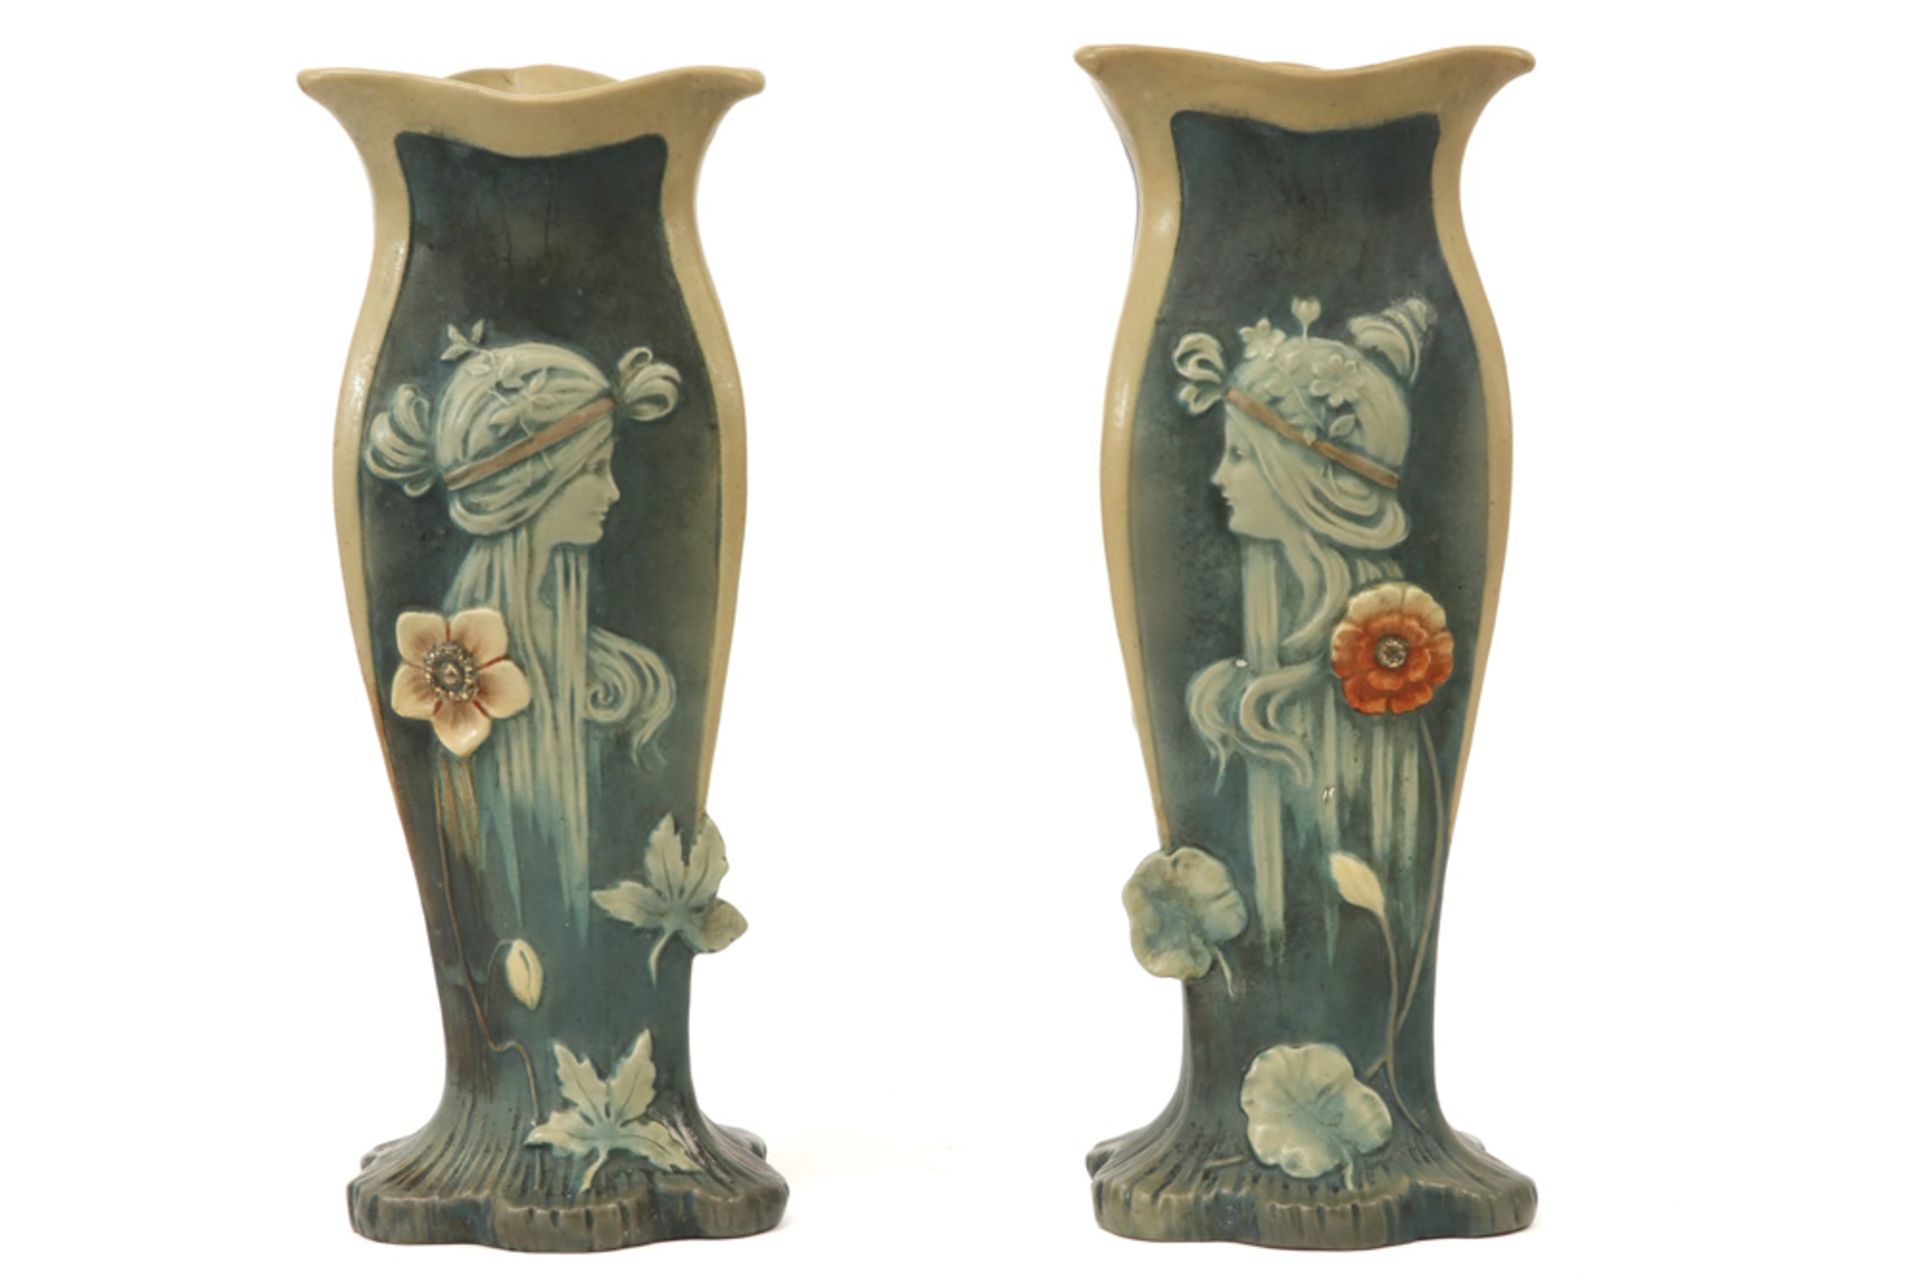 pair of Art Nouveau vases in ceramic with whiplash ornamentation and female figures ||Paar Art